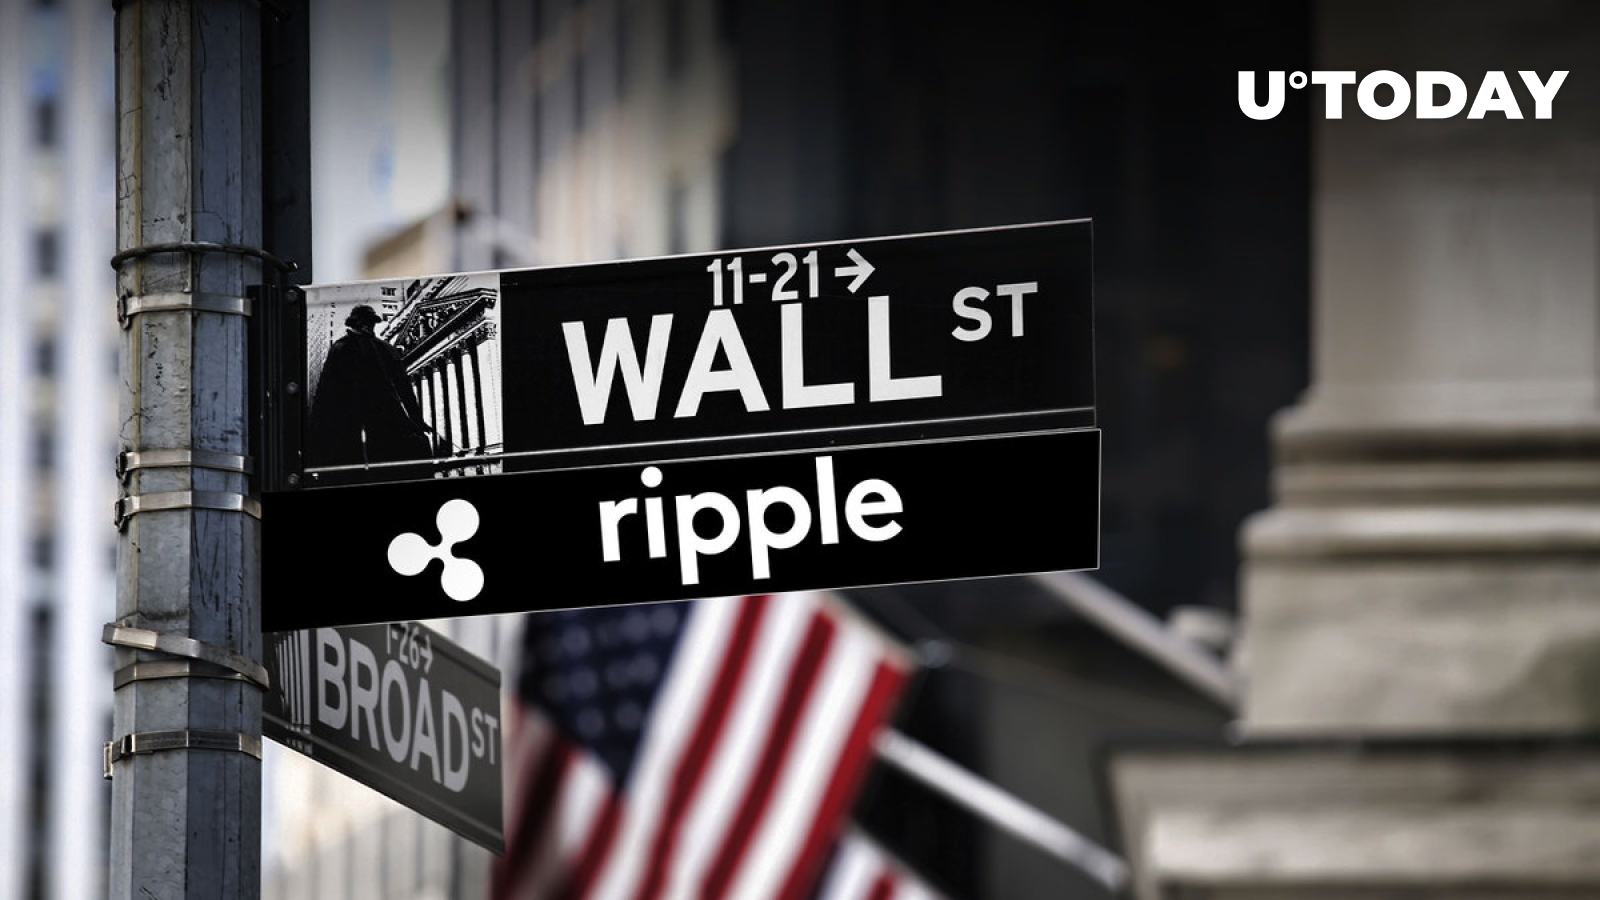 ripple-ad-shows-up-in-wall-street-station-details